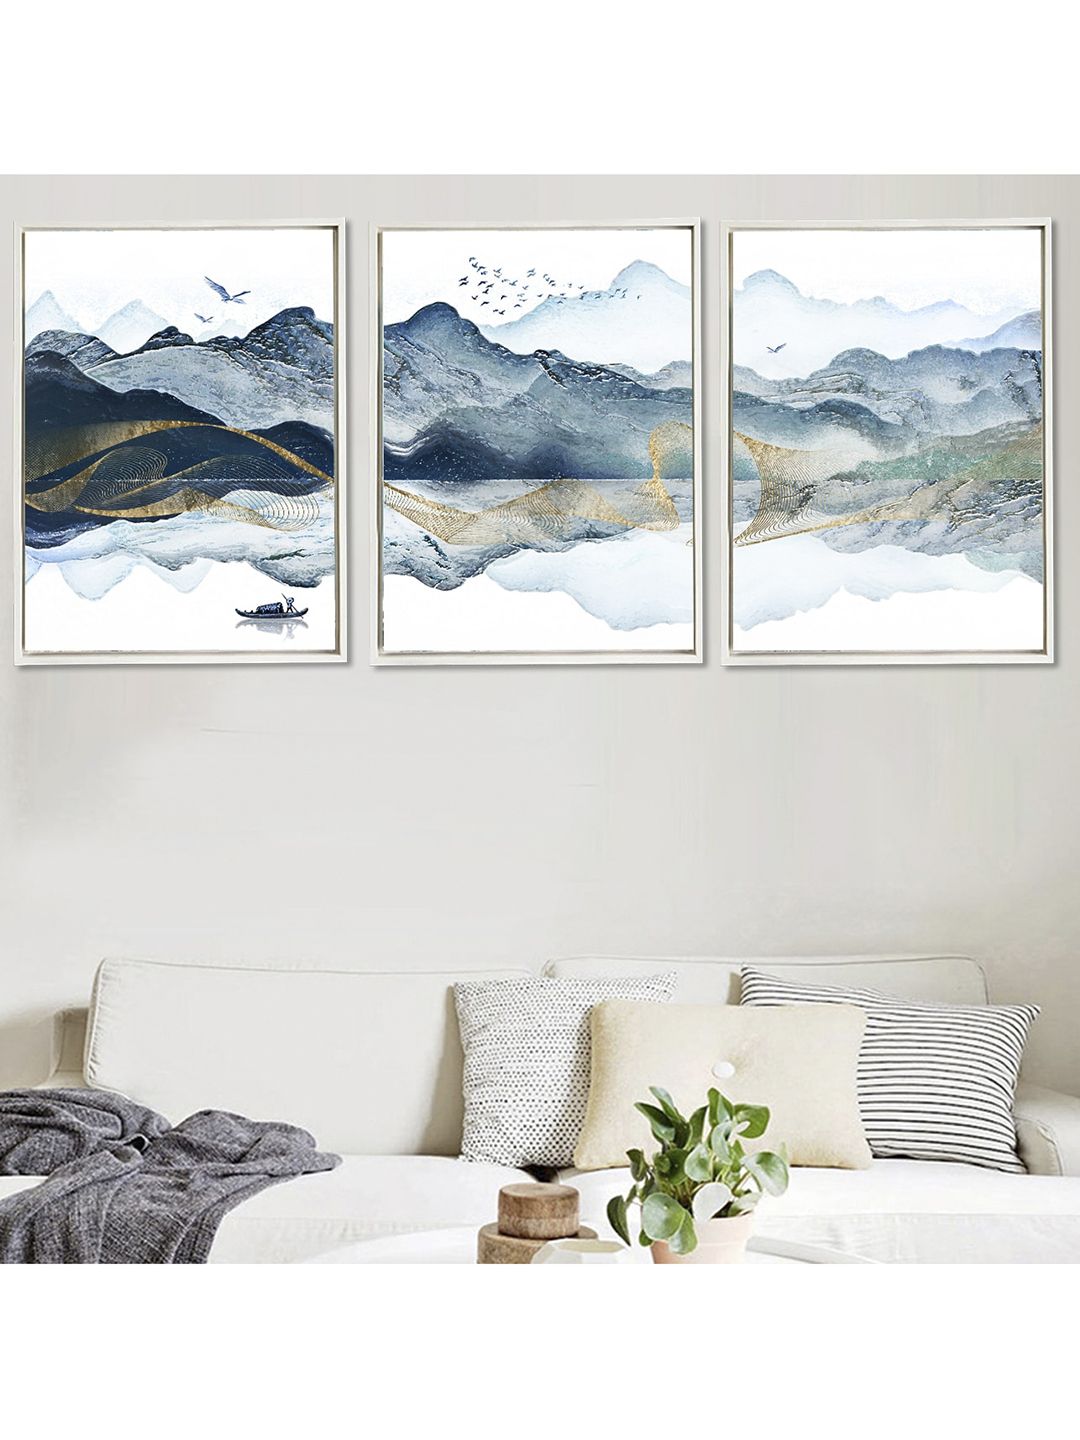 Art Street Unisex Set Of 3 White & Blue Mountain Nature Theme Framed Canvas Painting Price in India